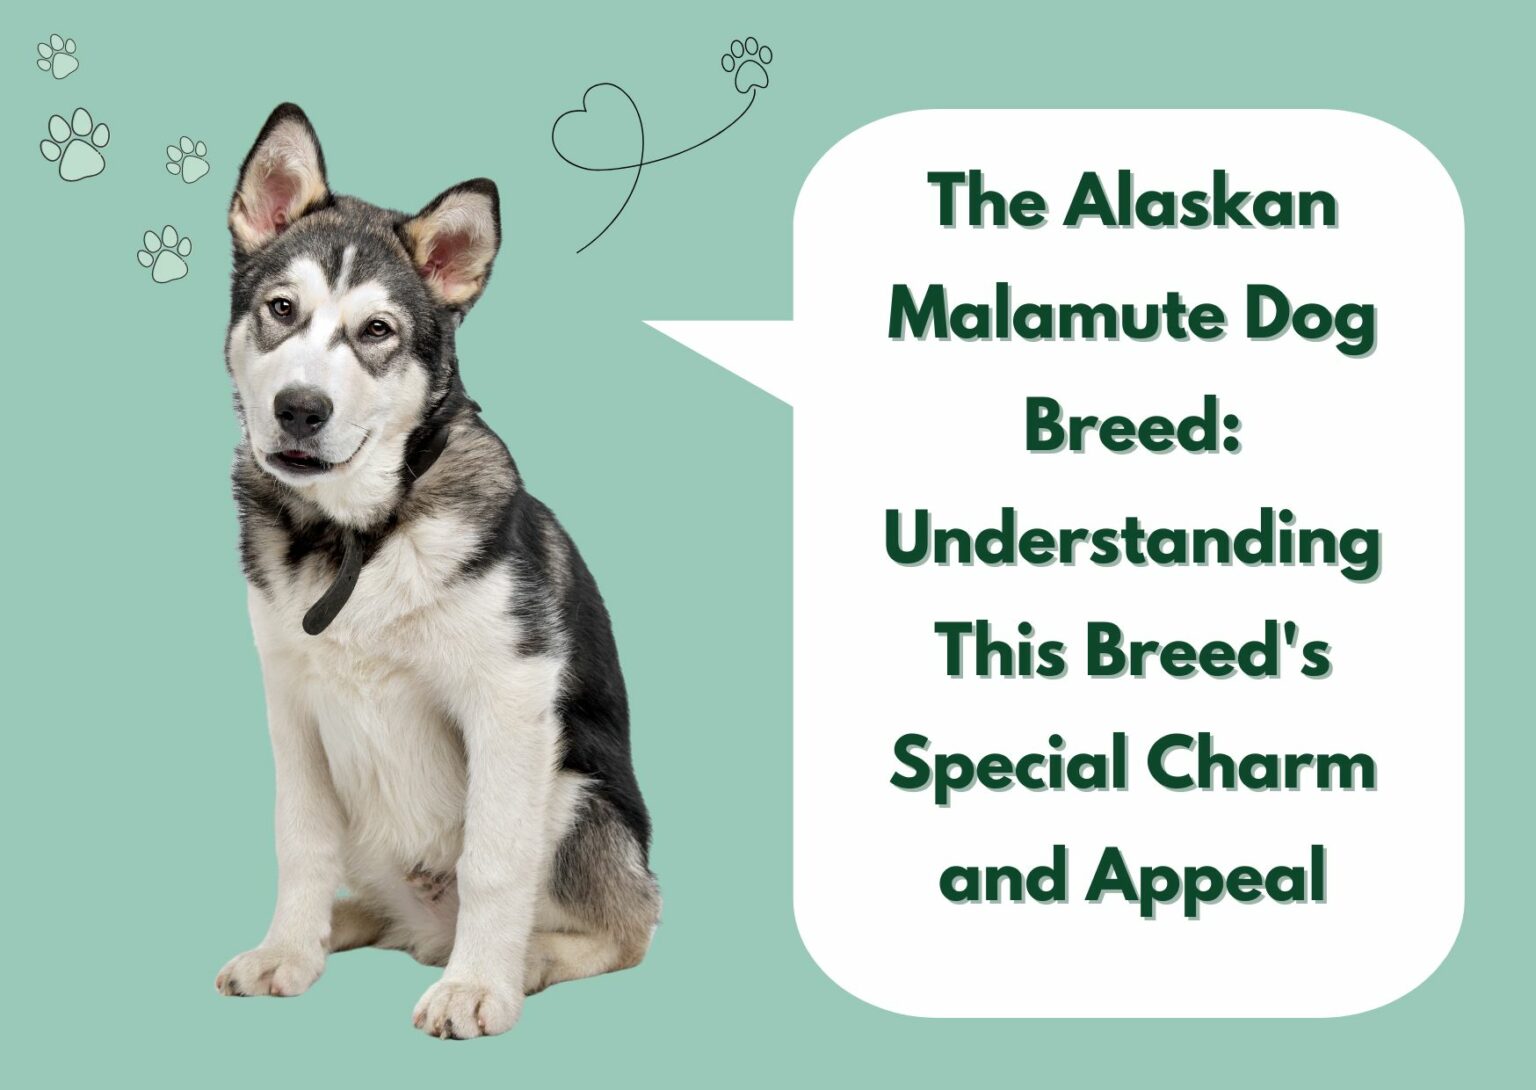 The Alaskan Malamute Dog Breed_ Understanding This Breed's Special Charm and Appeal